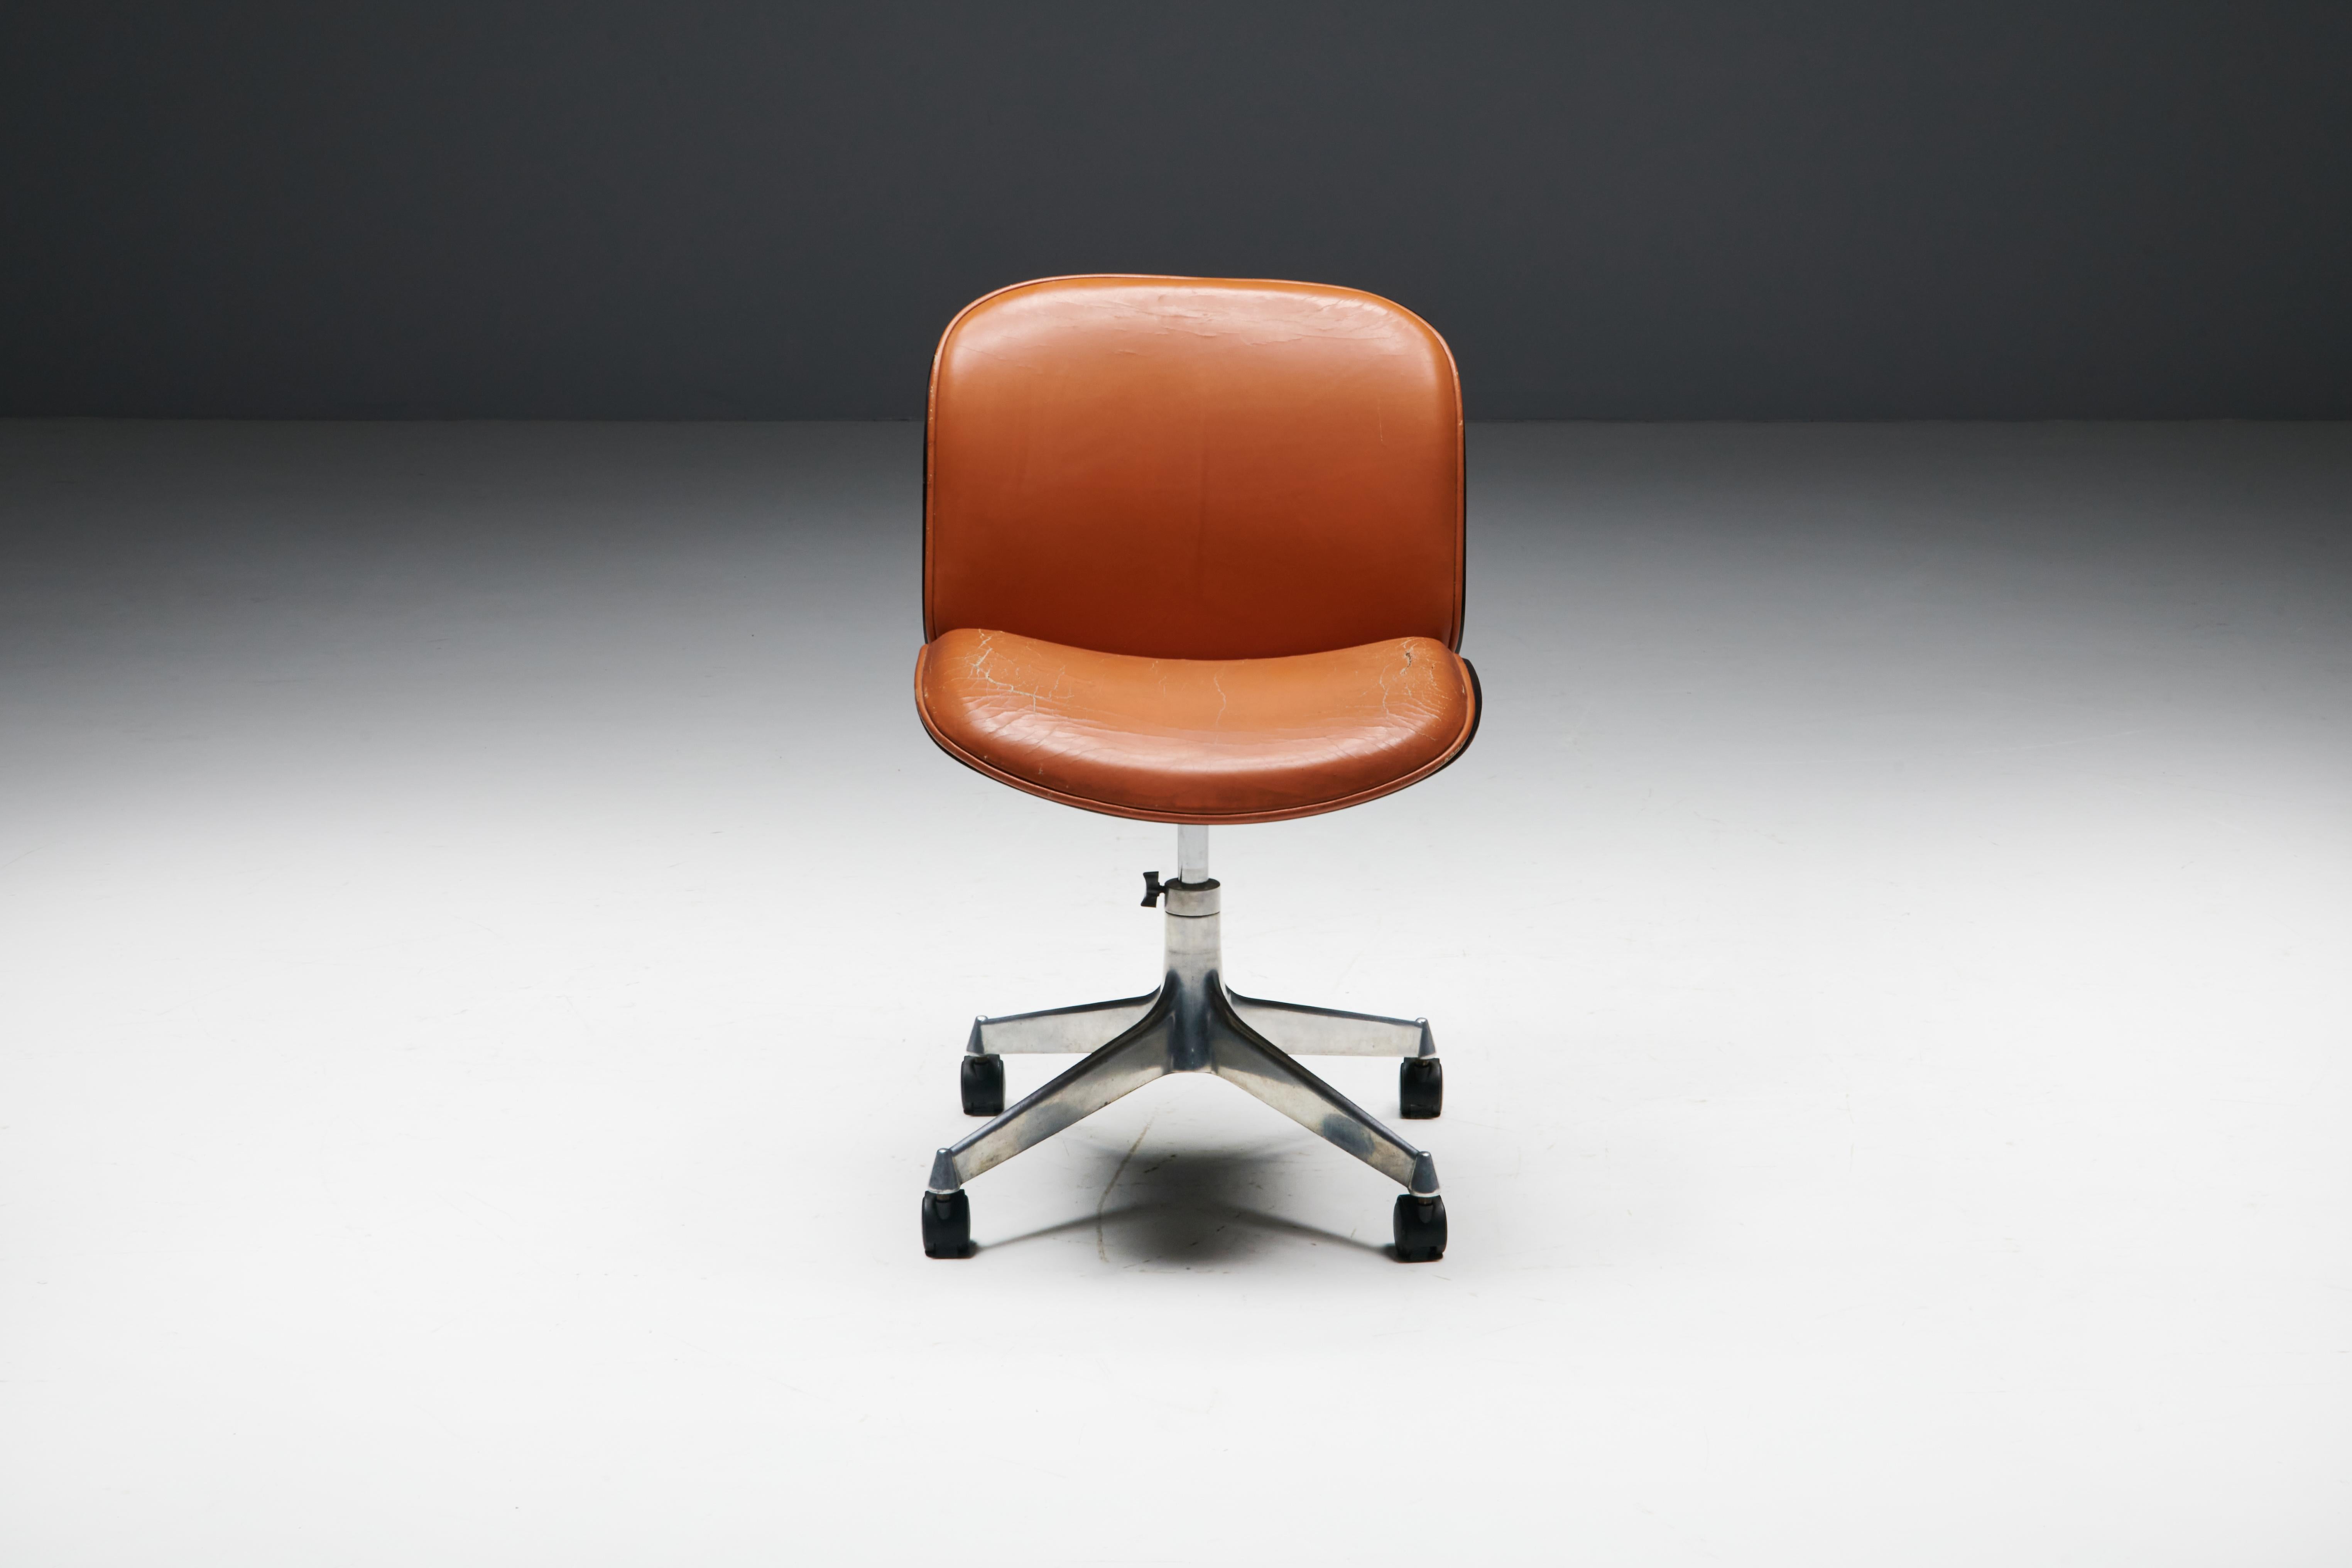 Office chair by Ico Parisi for MIM Roma, a timeless masterpiece of mid-century Italian design. This office chair from Ico Parisi's renowned Terni series was crafted in 1958. Made of walnut veneer and with a beautiful grain pattern, the shell adds a